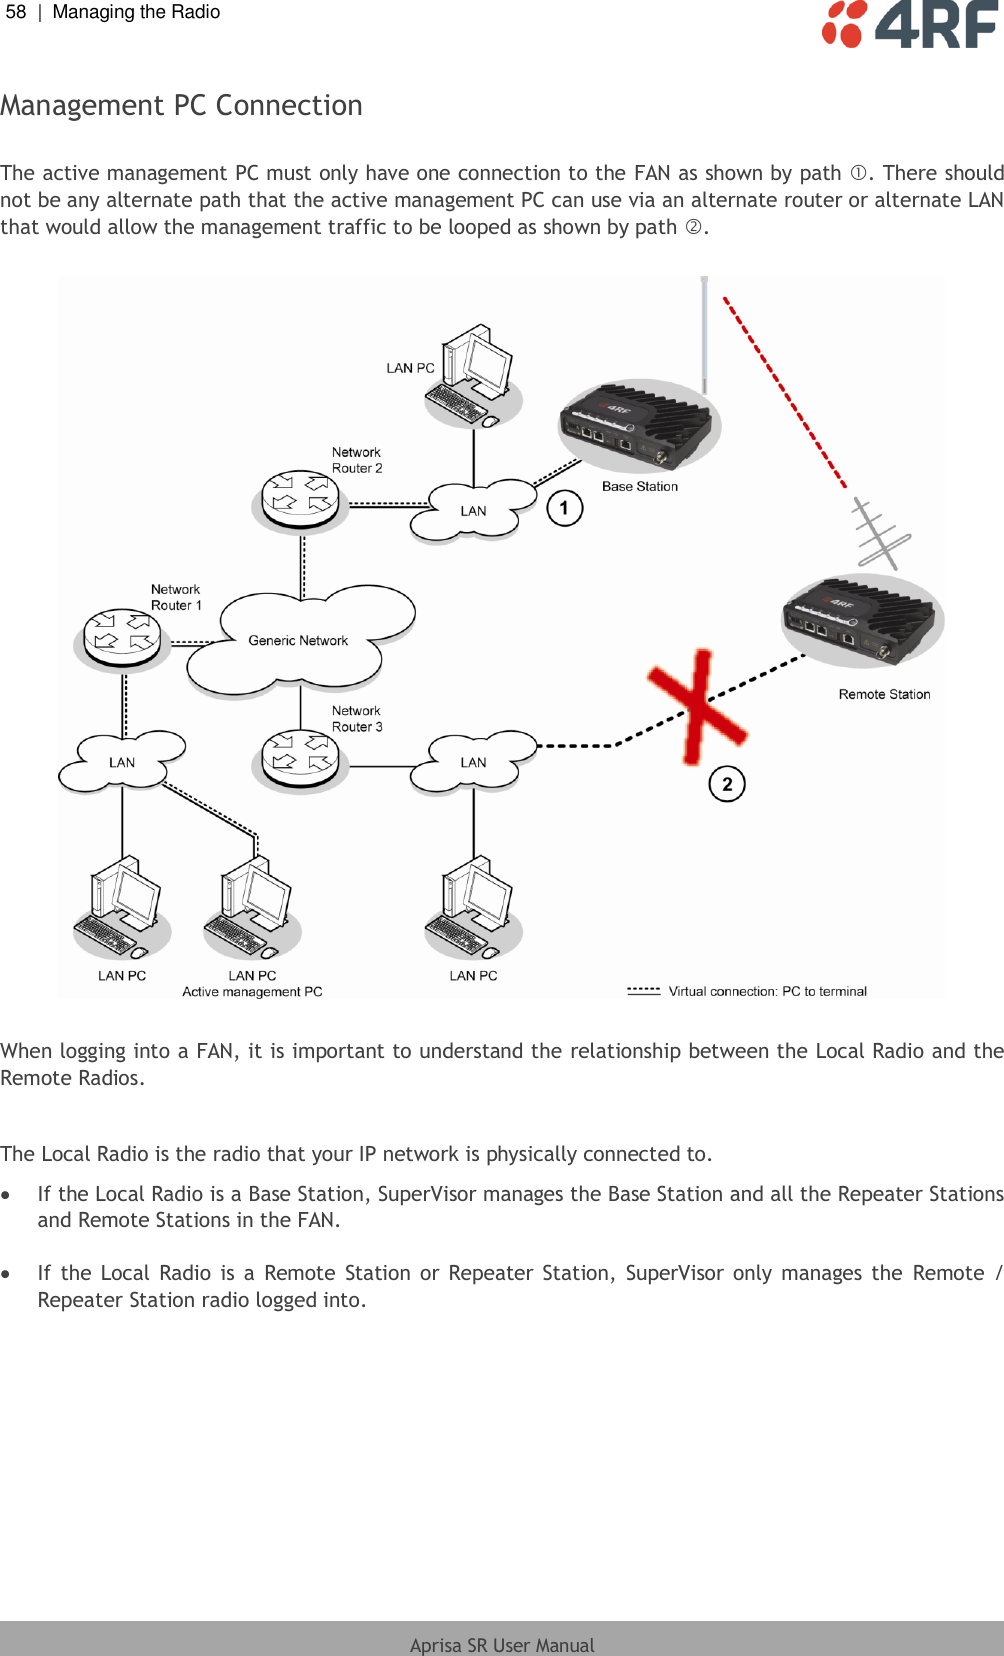 58  |  Managing the Radio   Aprisa SR User Manual  Management PC Connection  The active management PC must only have one connection to the FAN as shown by path . There should not be any alternate path that the active management PC can use via an alternate router or alternate LAN that would allow the management traffic to be looped as shown by path .    When logging into a FAN, it is important to understand the relationship between the Local Radio and the Remote Radios.  The Local Radio is the radio that your IP network is physically connected to.  If the Local Radio is a Base Station, SuperVisor manages the Base Station and all the Repeater Stations and Remote Stations in the FAN.   If  the  Local  Radio  is  a  Remote  Station  or  Repeater Station,  SuperVisor only  manages the  Remote  / Repeater Station radio logged into.  